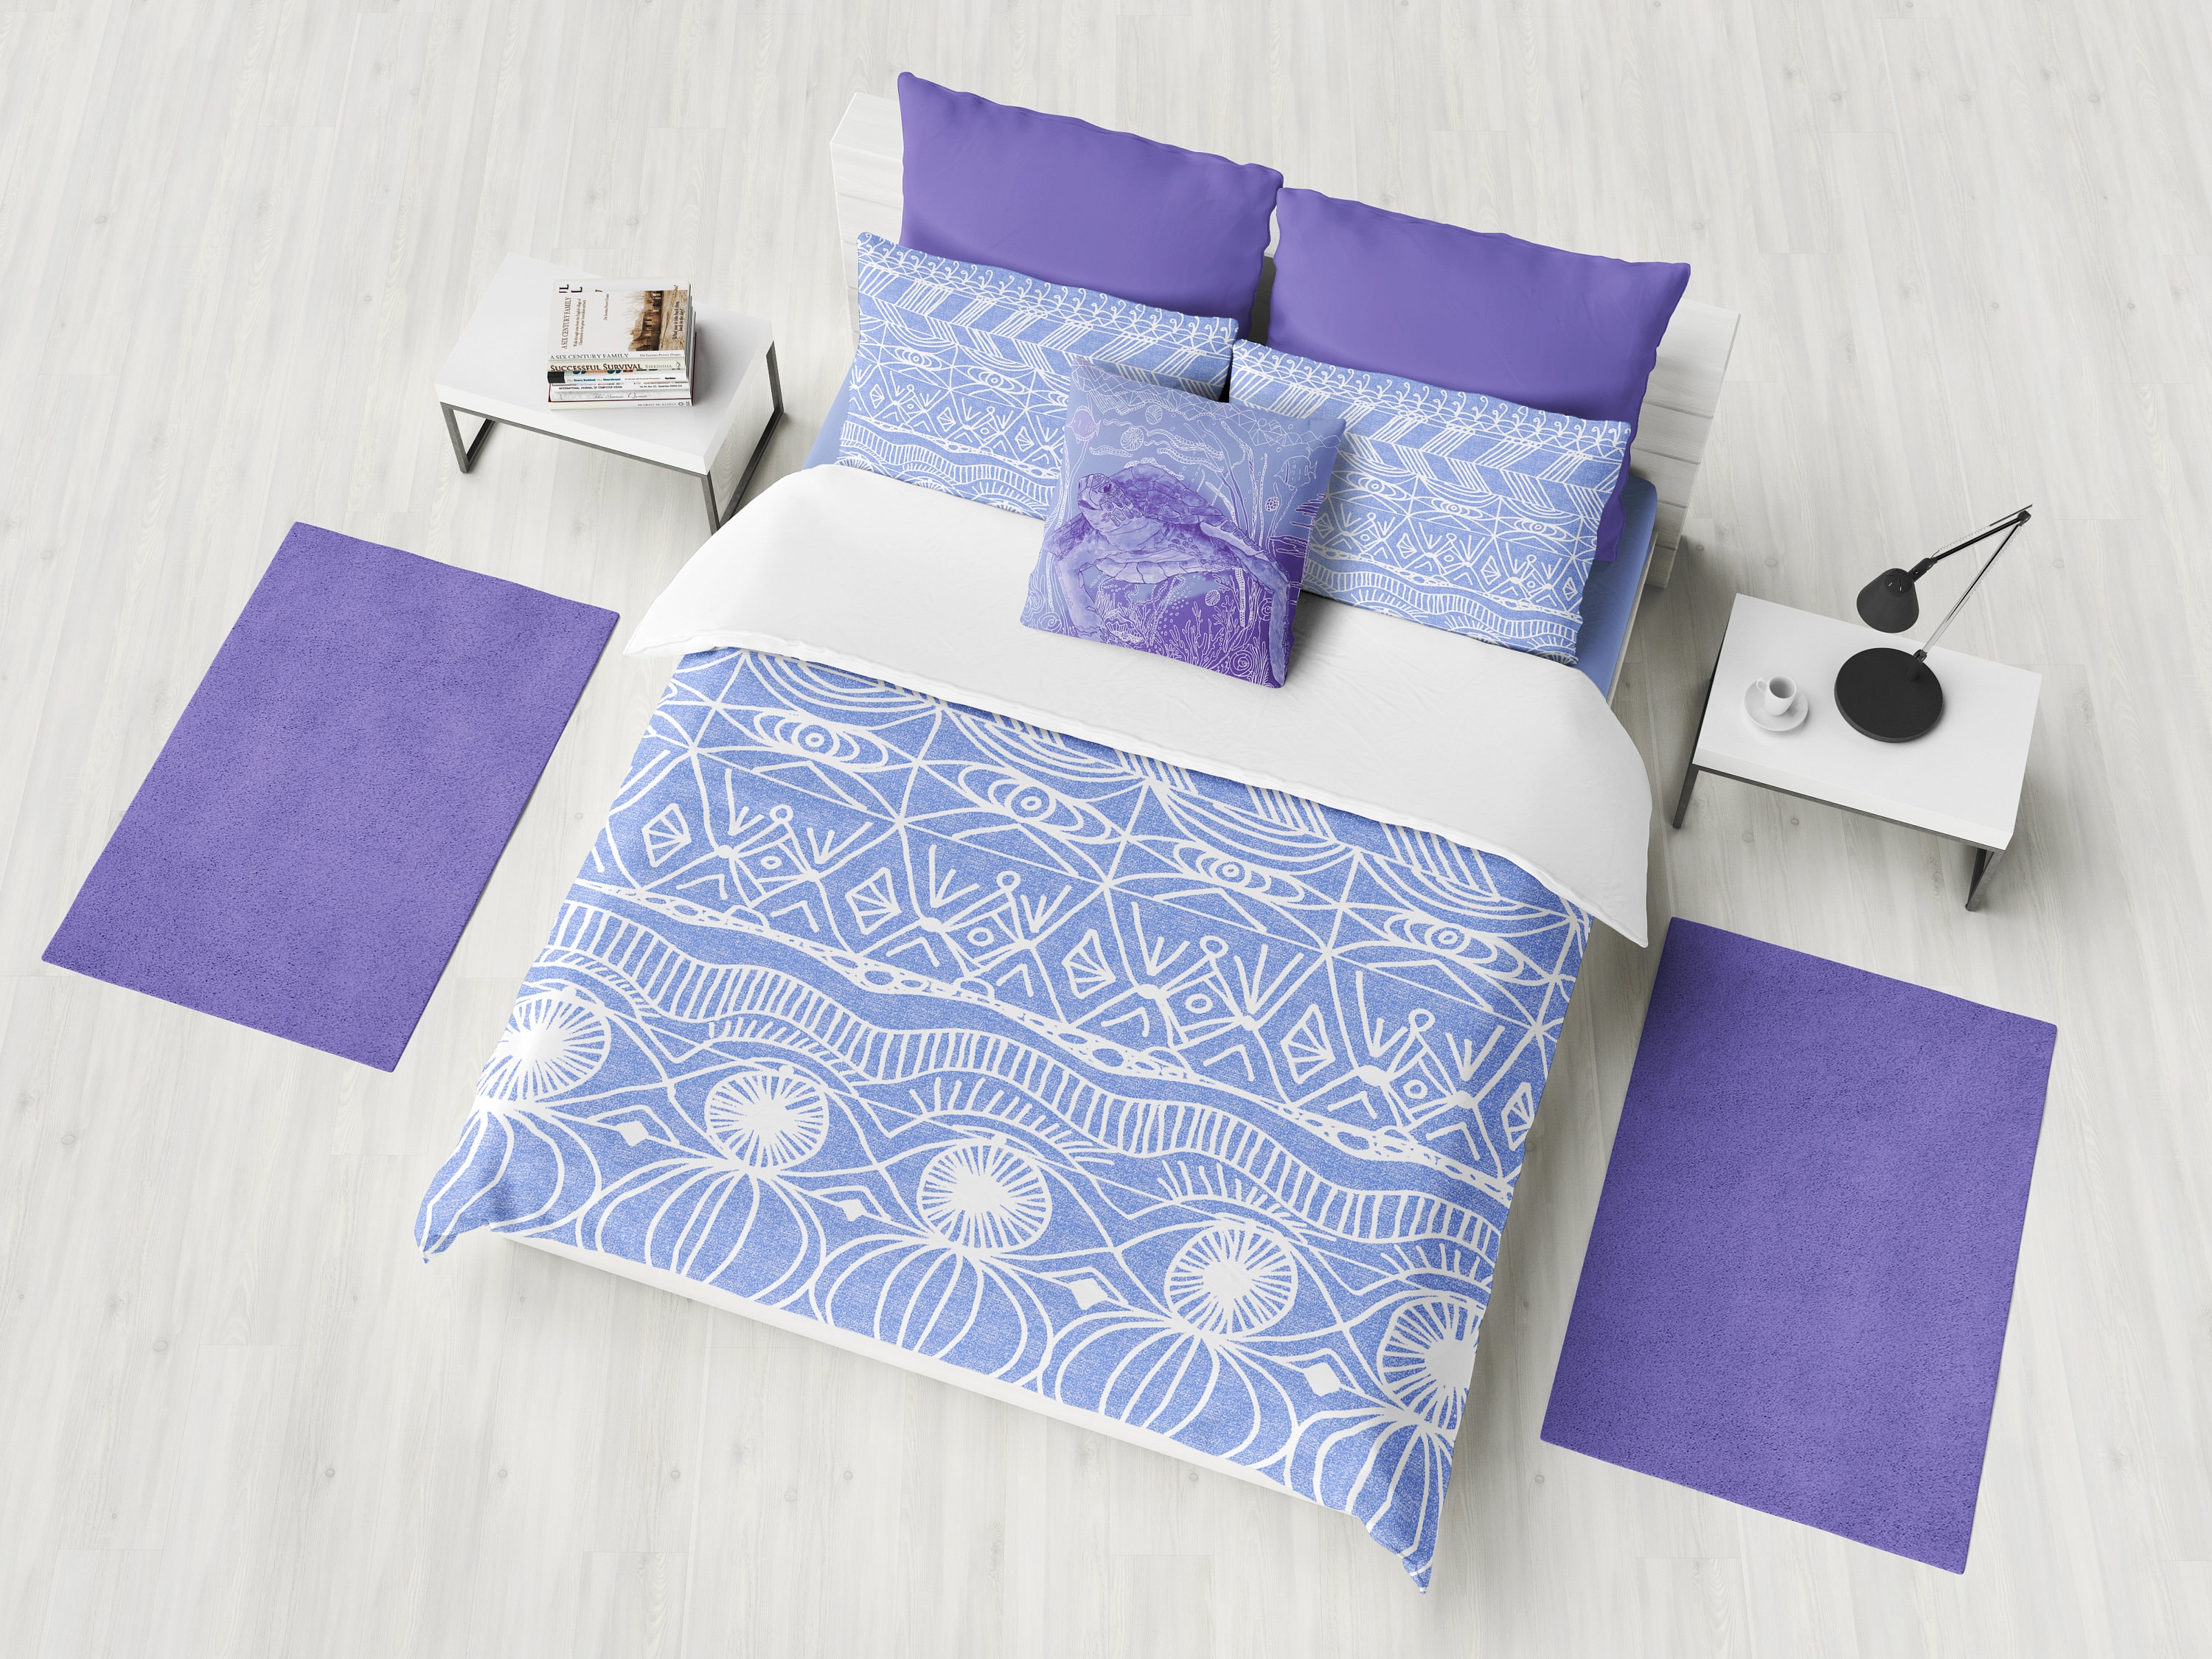 periwinkle colored bedspread featured on carlton bedroom furniture